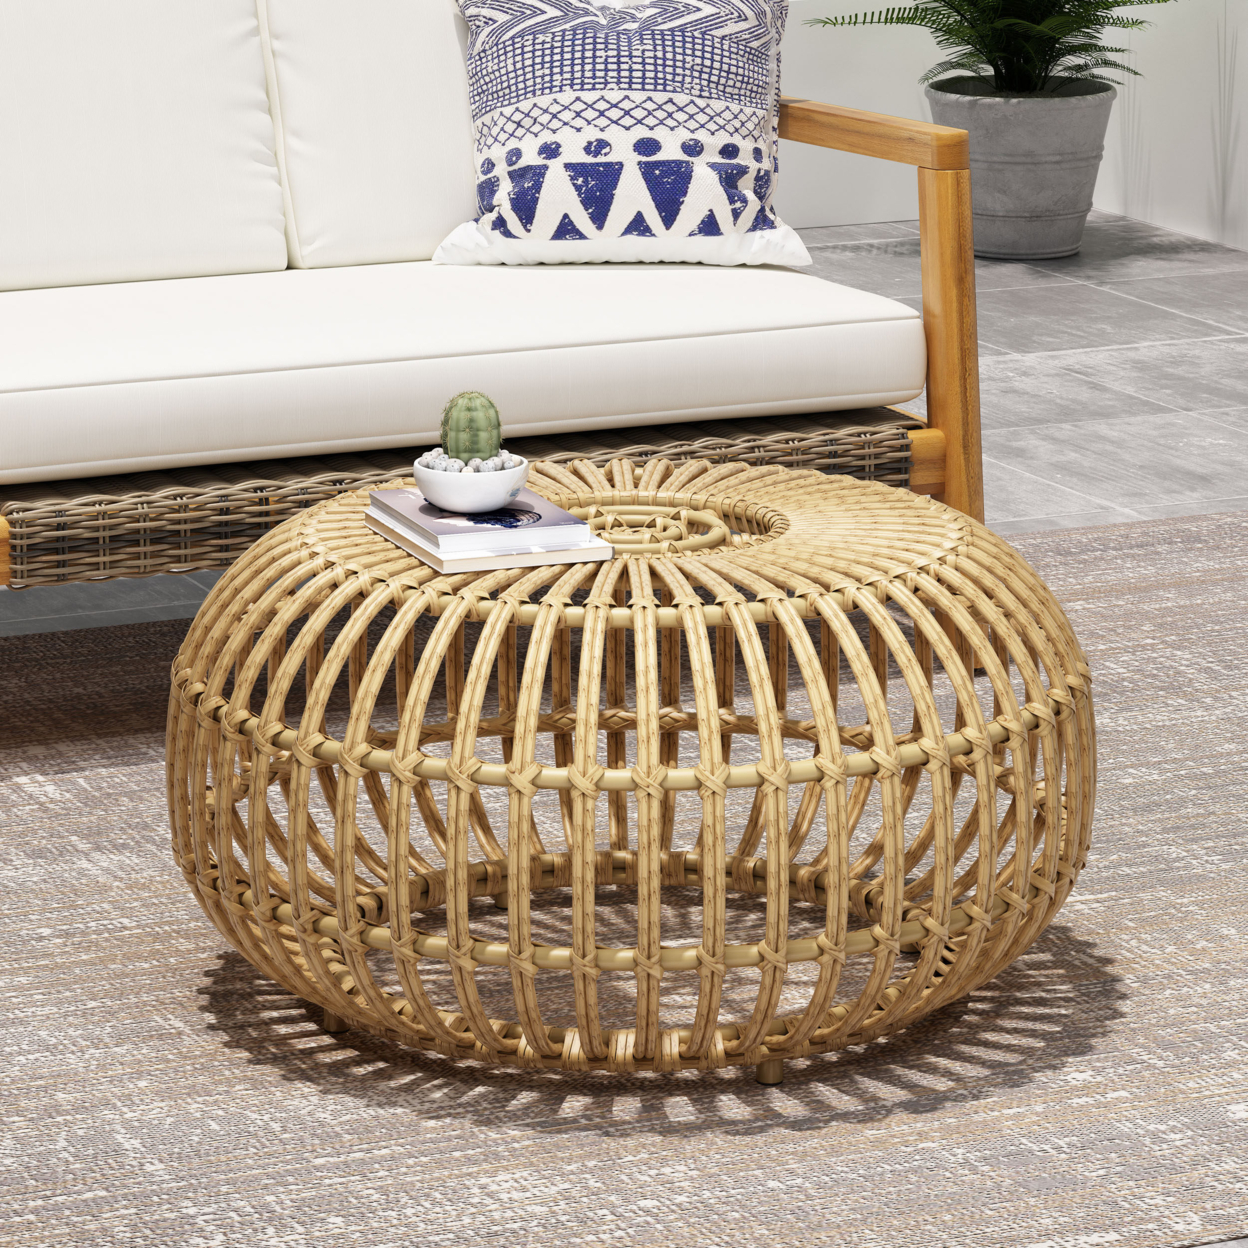 GDF Studio Whitetail Outdoor Boho Wicker Coffee Table, Light Brown - image 2 of 7